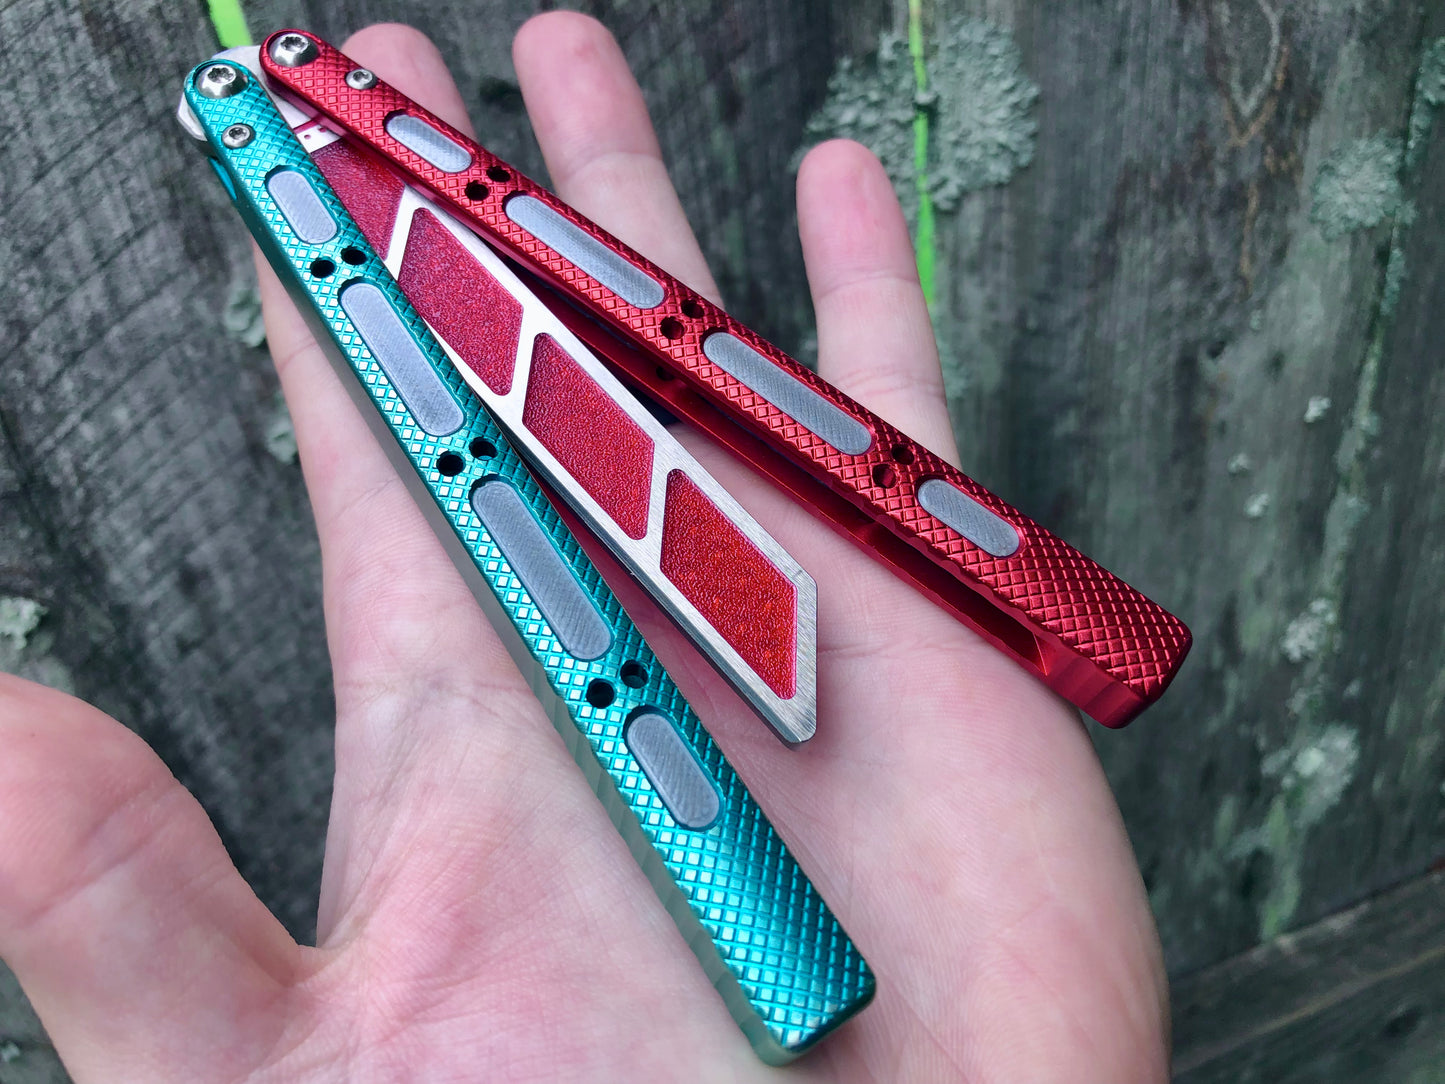 Add blade weight and a pop of color to your NRB Ultralight balisong trainer with these custom-made Zippy blade inserts. The inserts are made of a shatter-proof polyurethane with an edge lip, so they won't fall out on drops. The inserts enable you to modify the balance of your Ultralight and can be used to compensate for the added handle weight from the Zippy handle inlays.